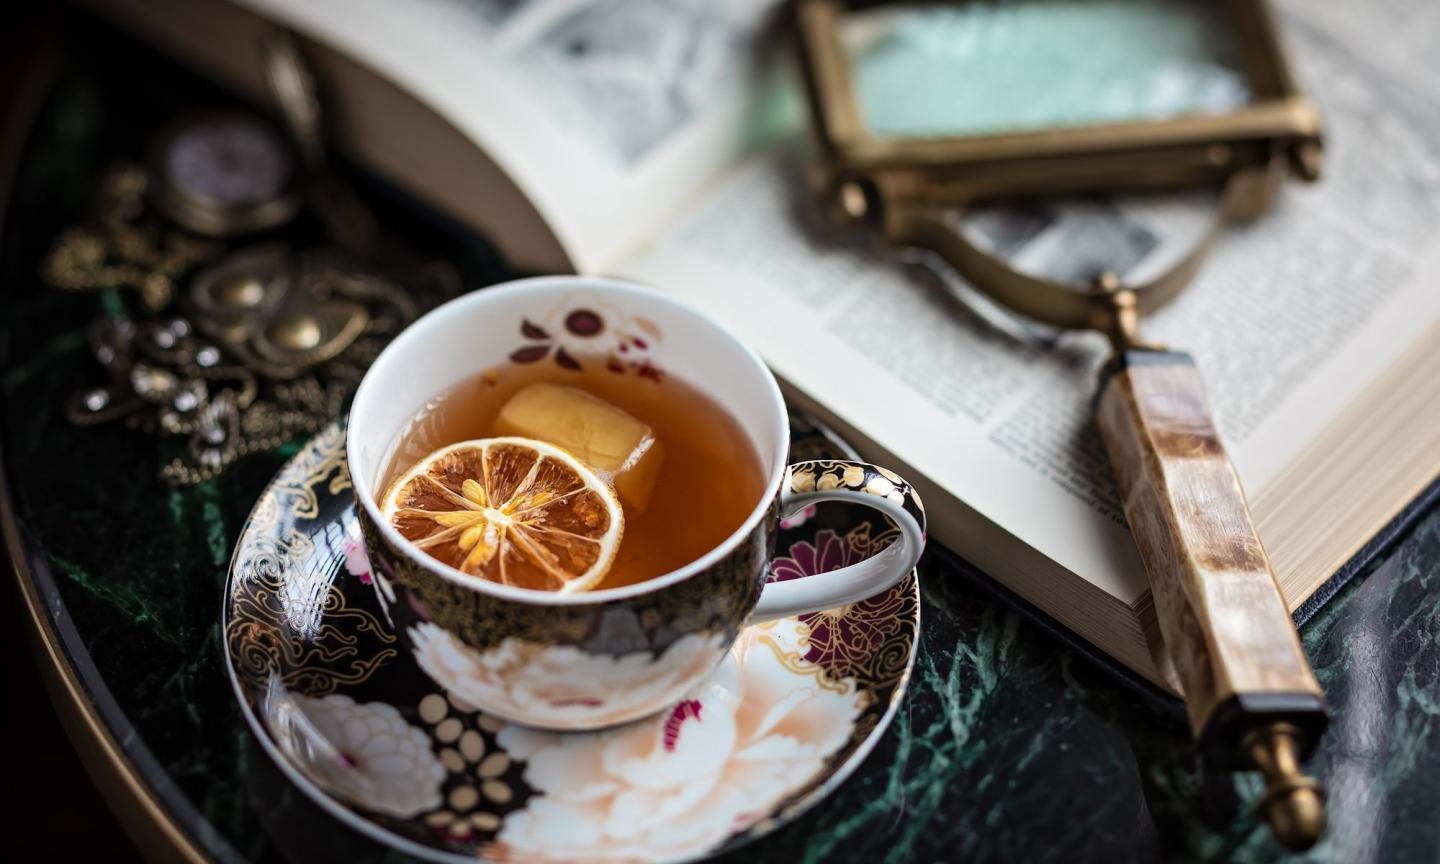 The Catch of Tea at Frank's Library. Let your bartender know what you're looking for and they'll be more than willing to whip up something especially for you